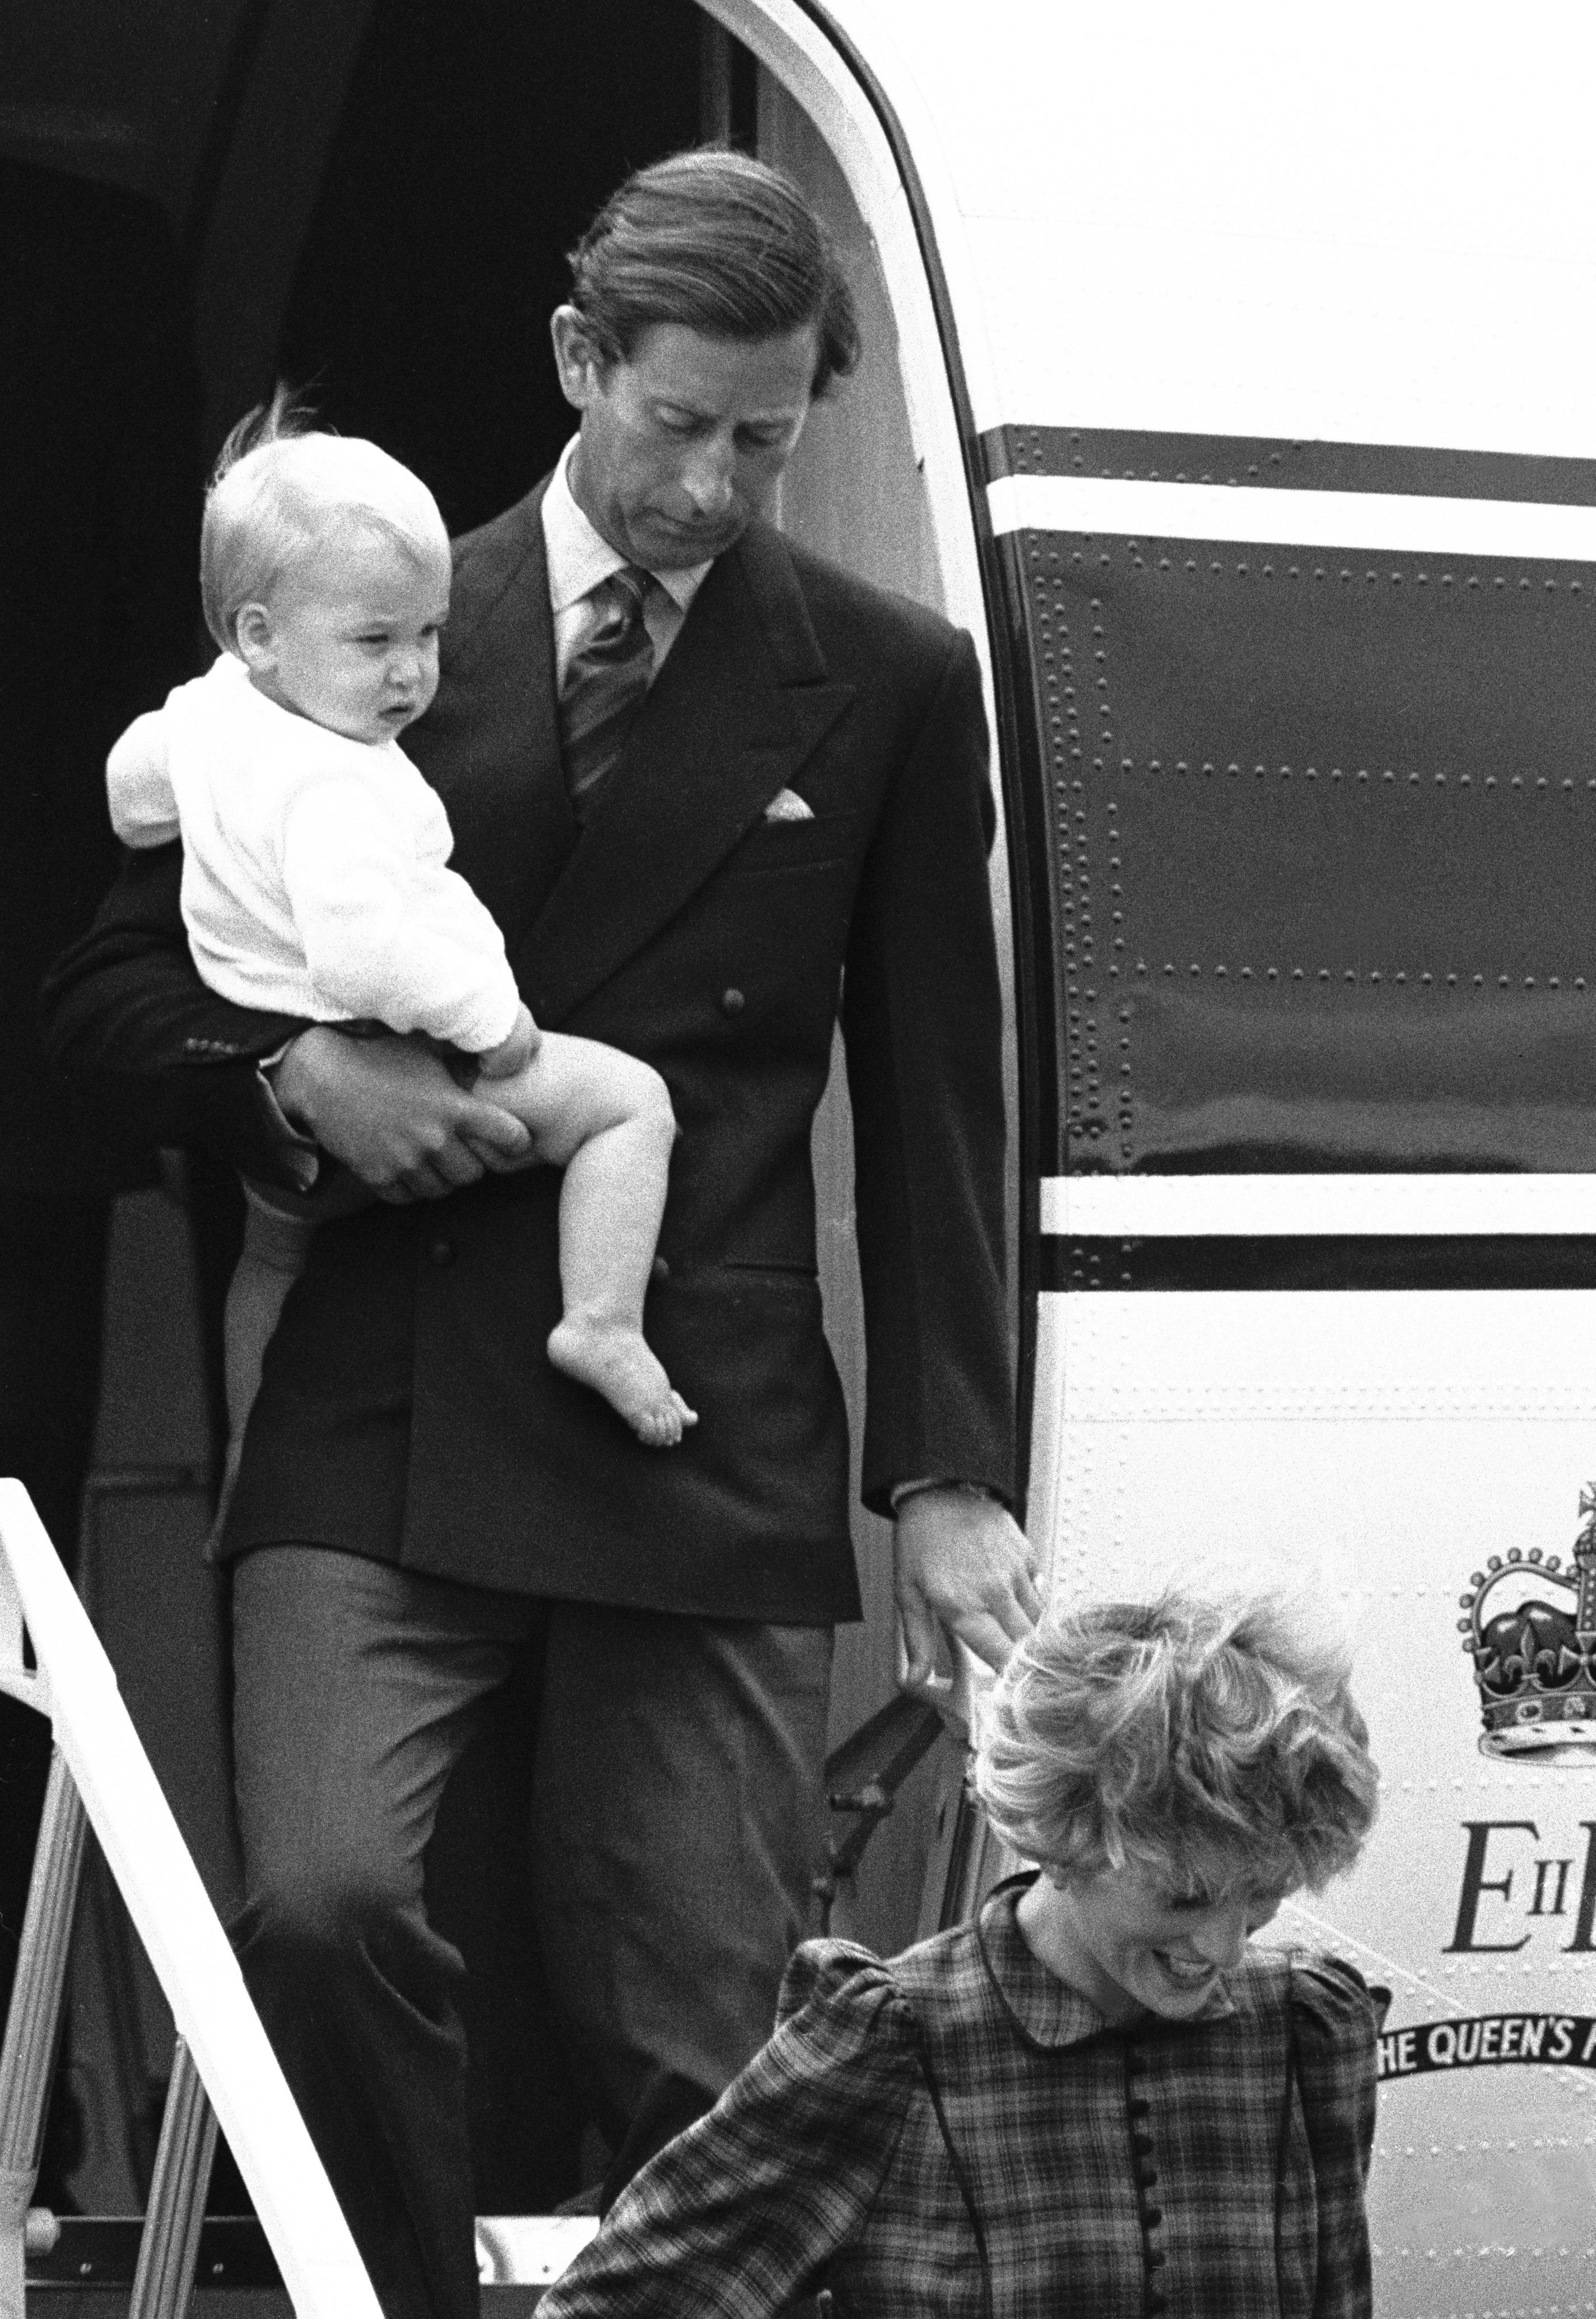 <p>Prince Charles arrived on the queen's flight at Aberdeen Airport in Scotland on Aug. 15, 1983, and exited after Princess Diana while carrying a young <a href="https://www.wonderwall.com/celebrity/profiles/overview/prince-william-482.article">Prince William</a> before heading to their family's Balmoral estate.</p>